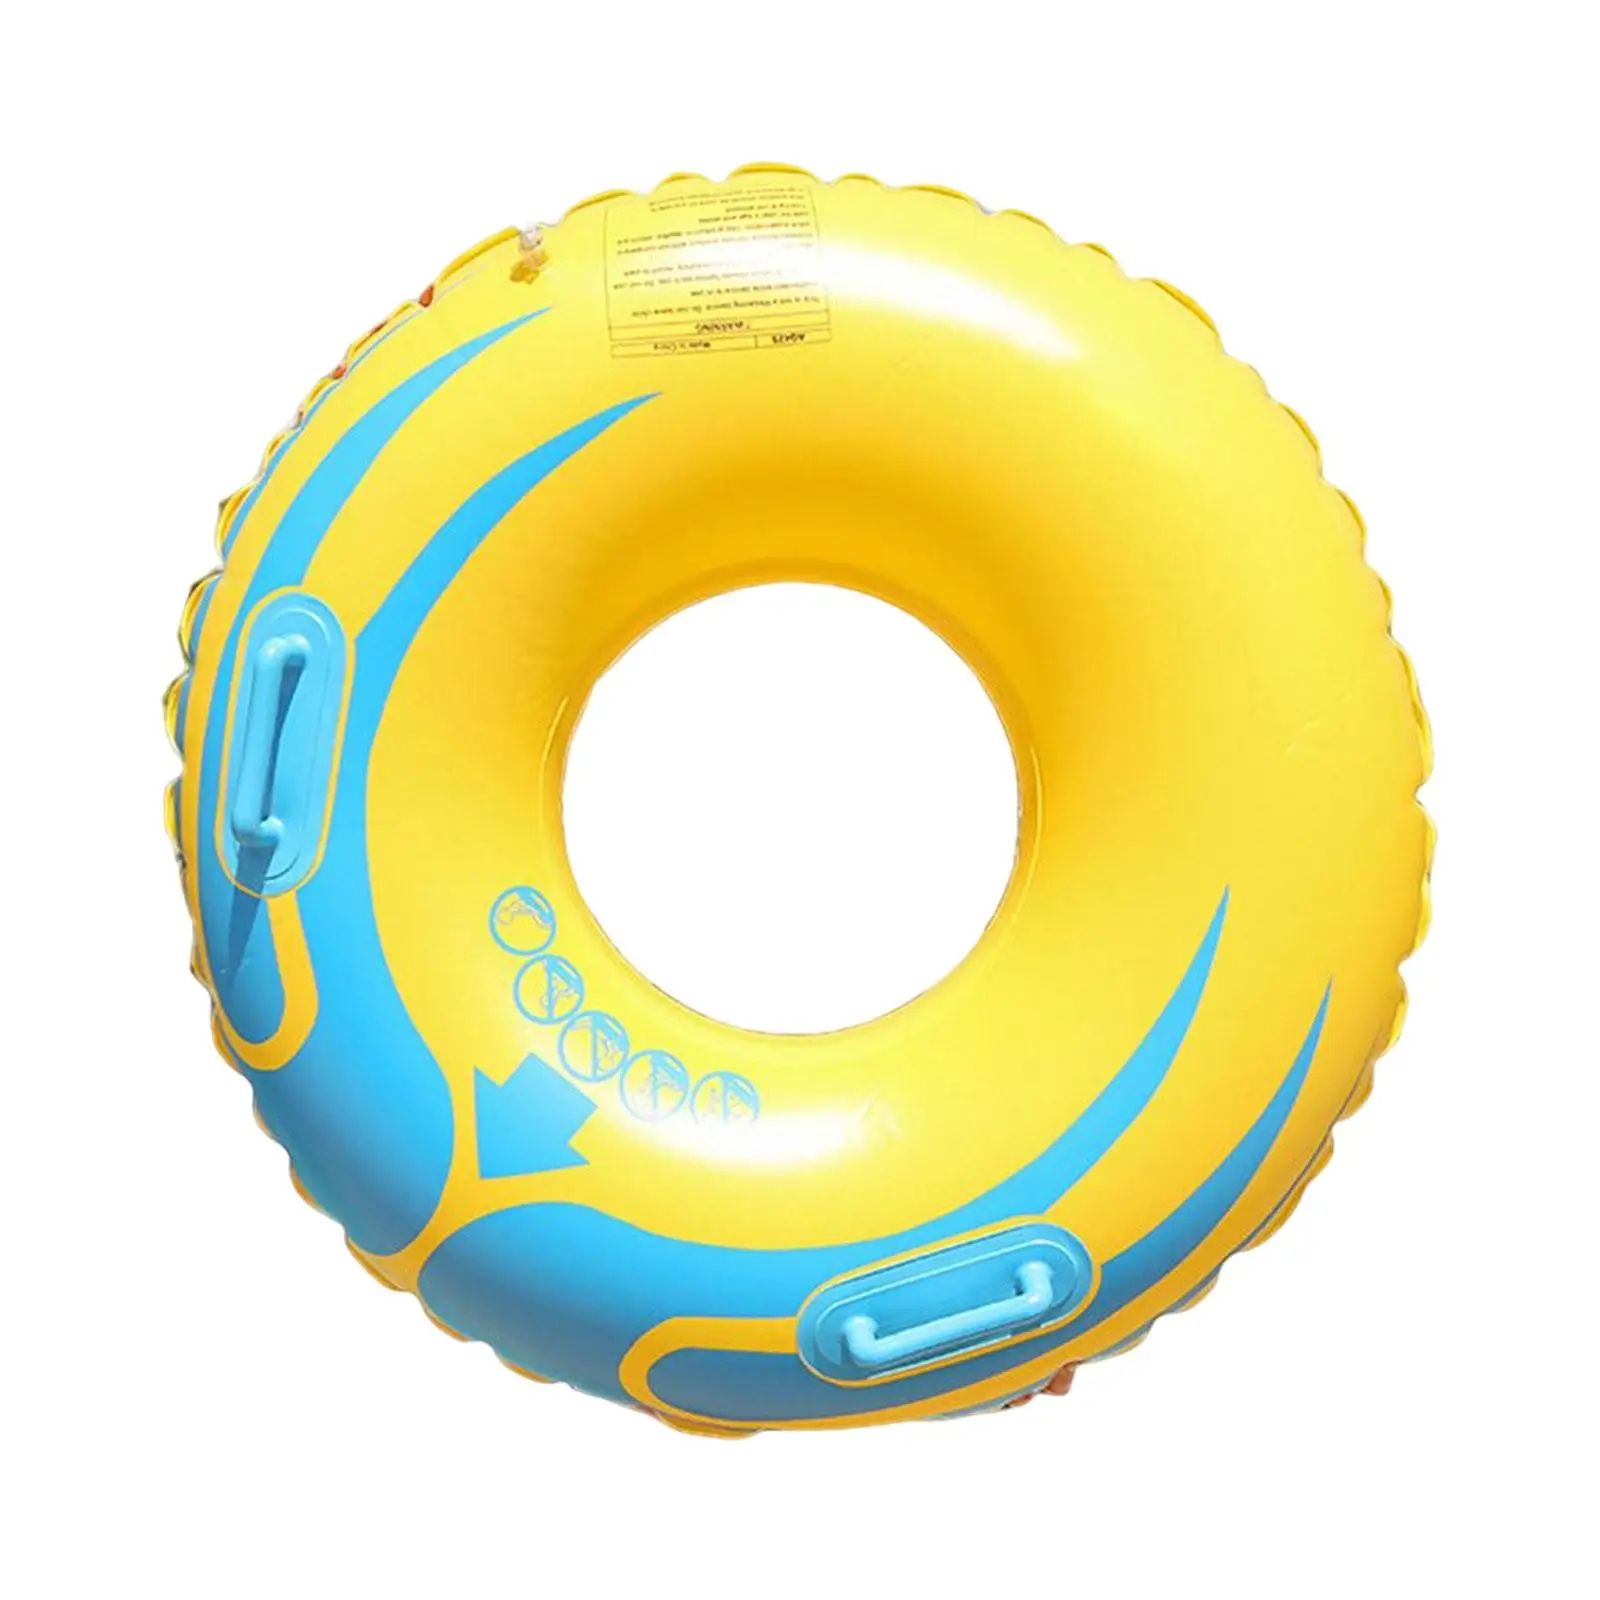 Swim Tubes Rings Portable Inflatable Pool Floats for Water Park Rivers Beach